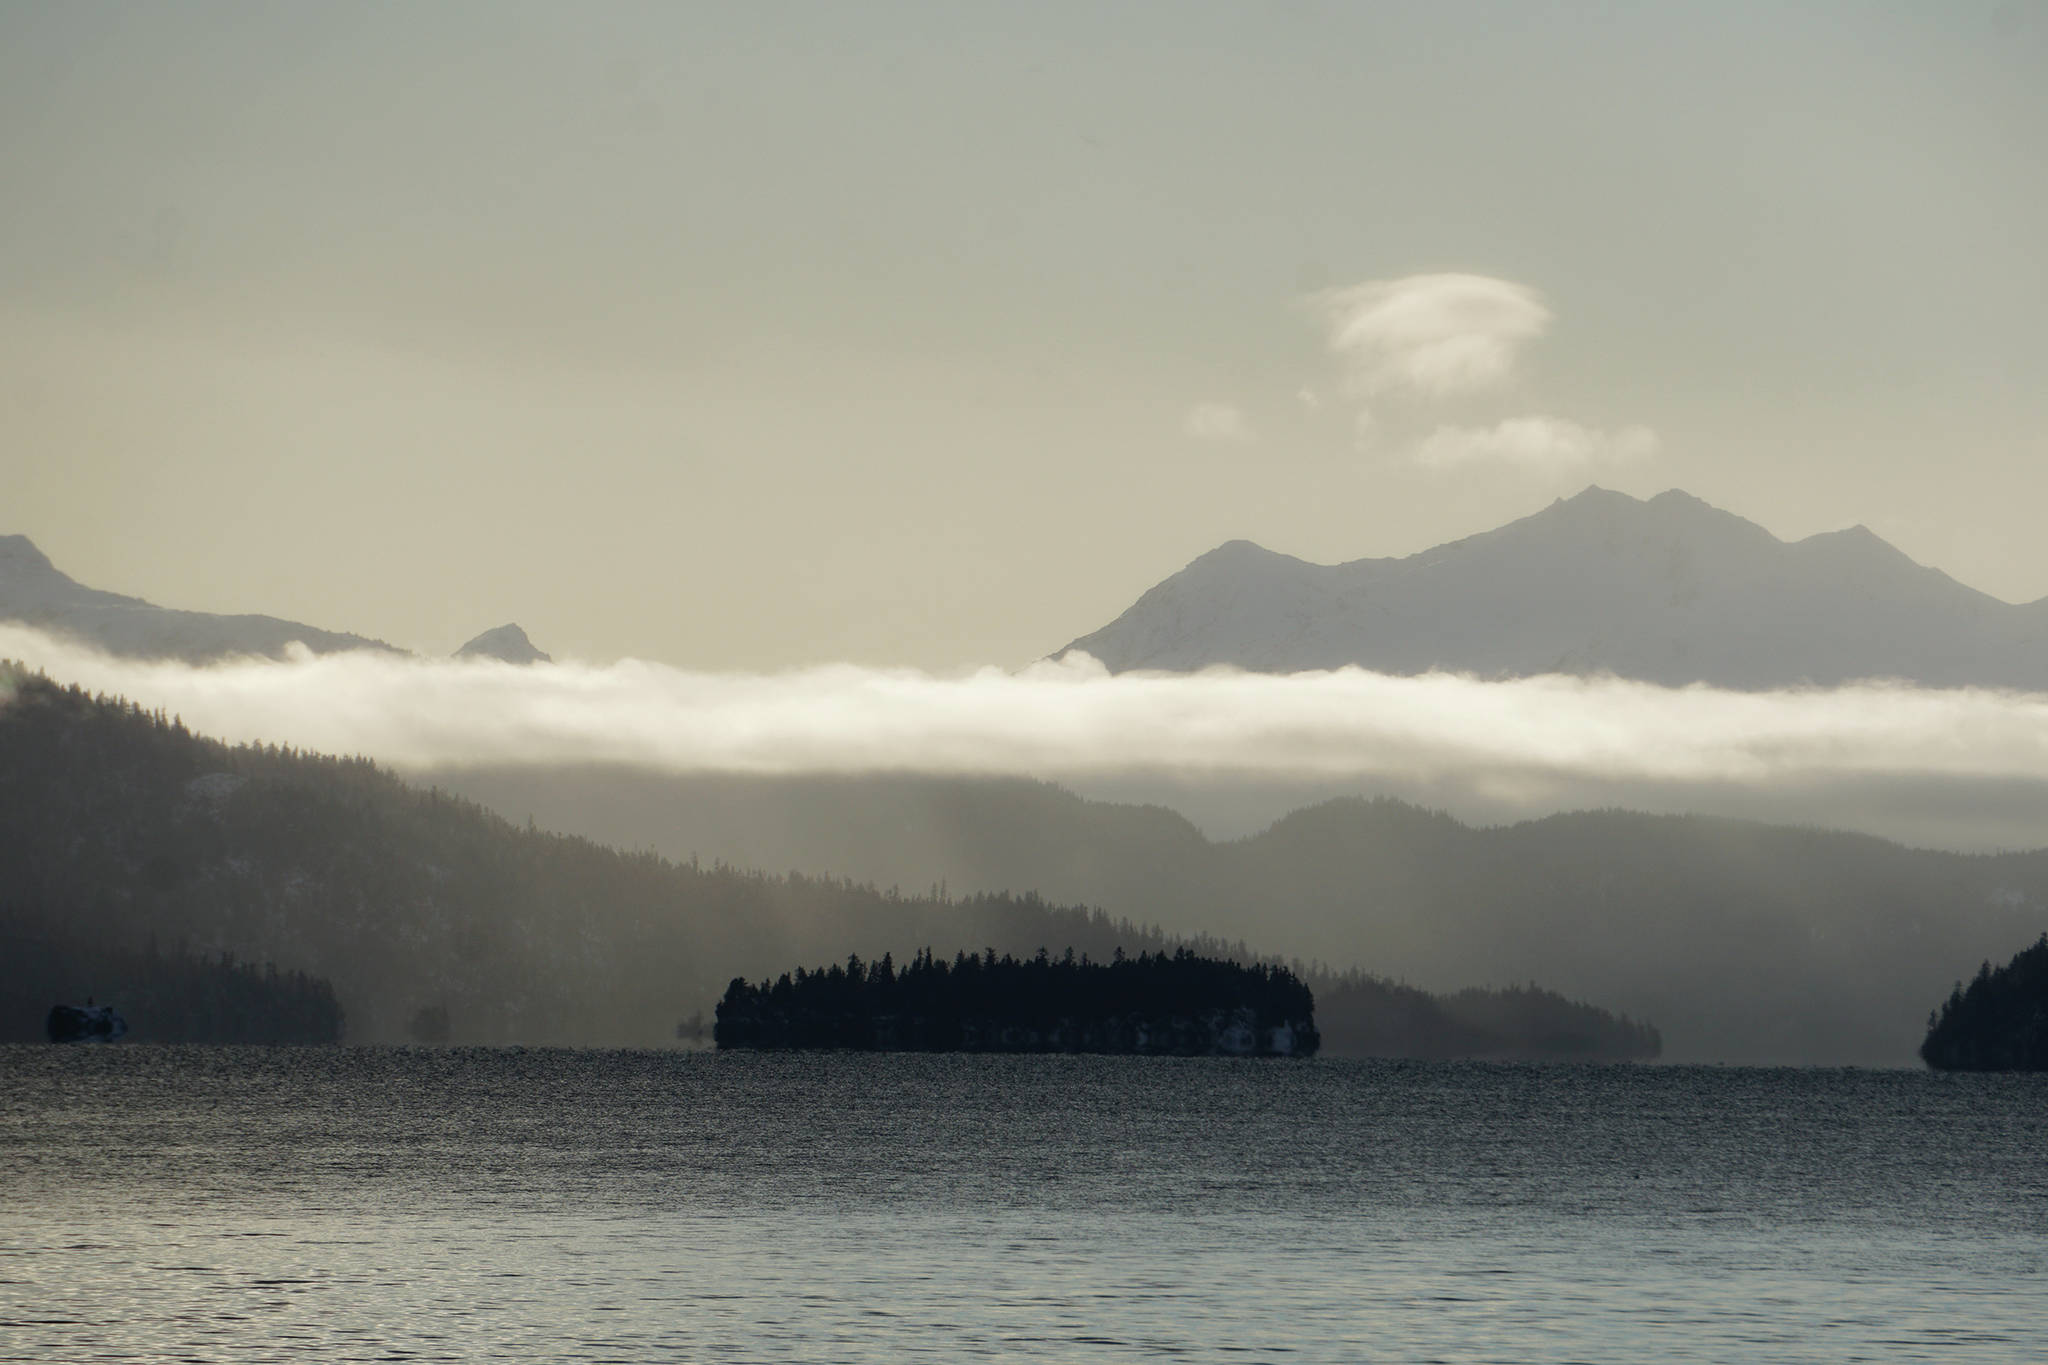 Light snow falls over Eldred Passage on the south side of Kachemak Bay on Monday afternoon, Jan. 20, 2020, near Homer, Alaska. (Photo by Michael Armtrong/Homer News)